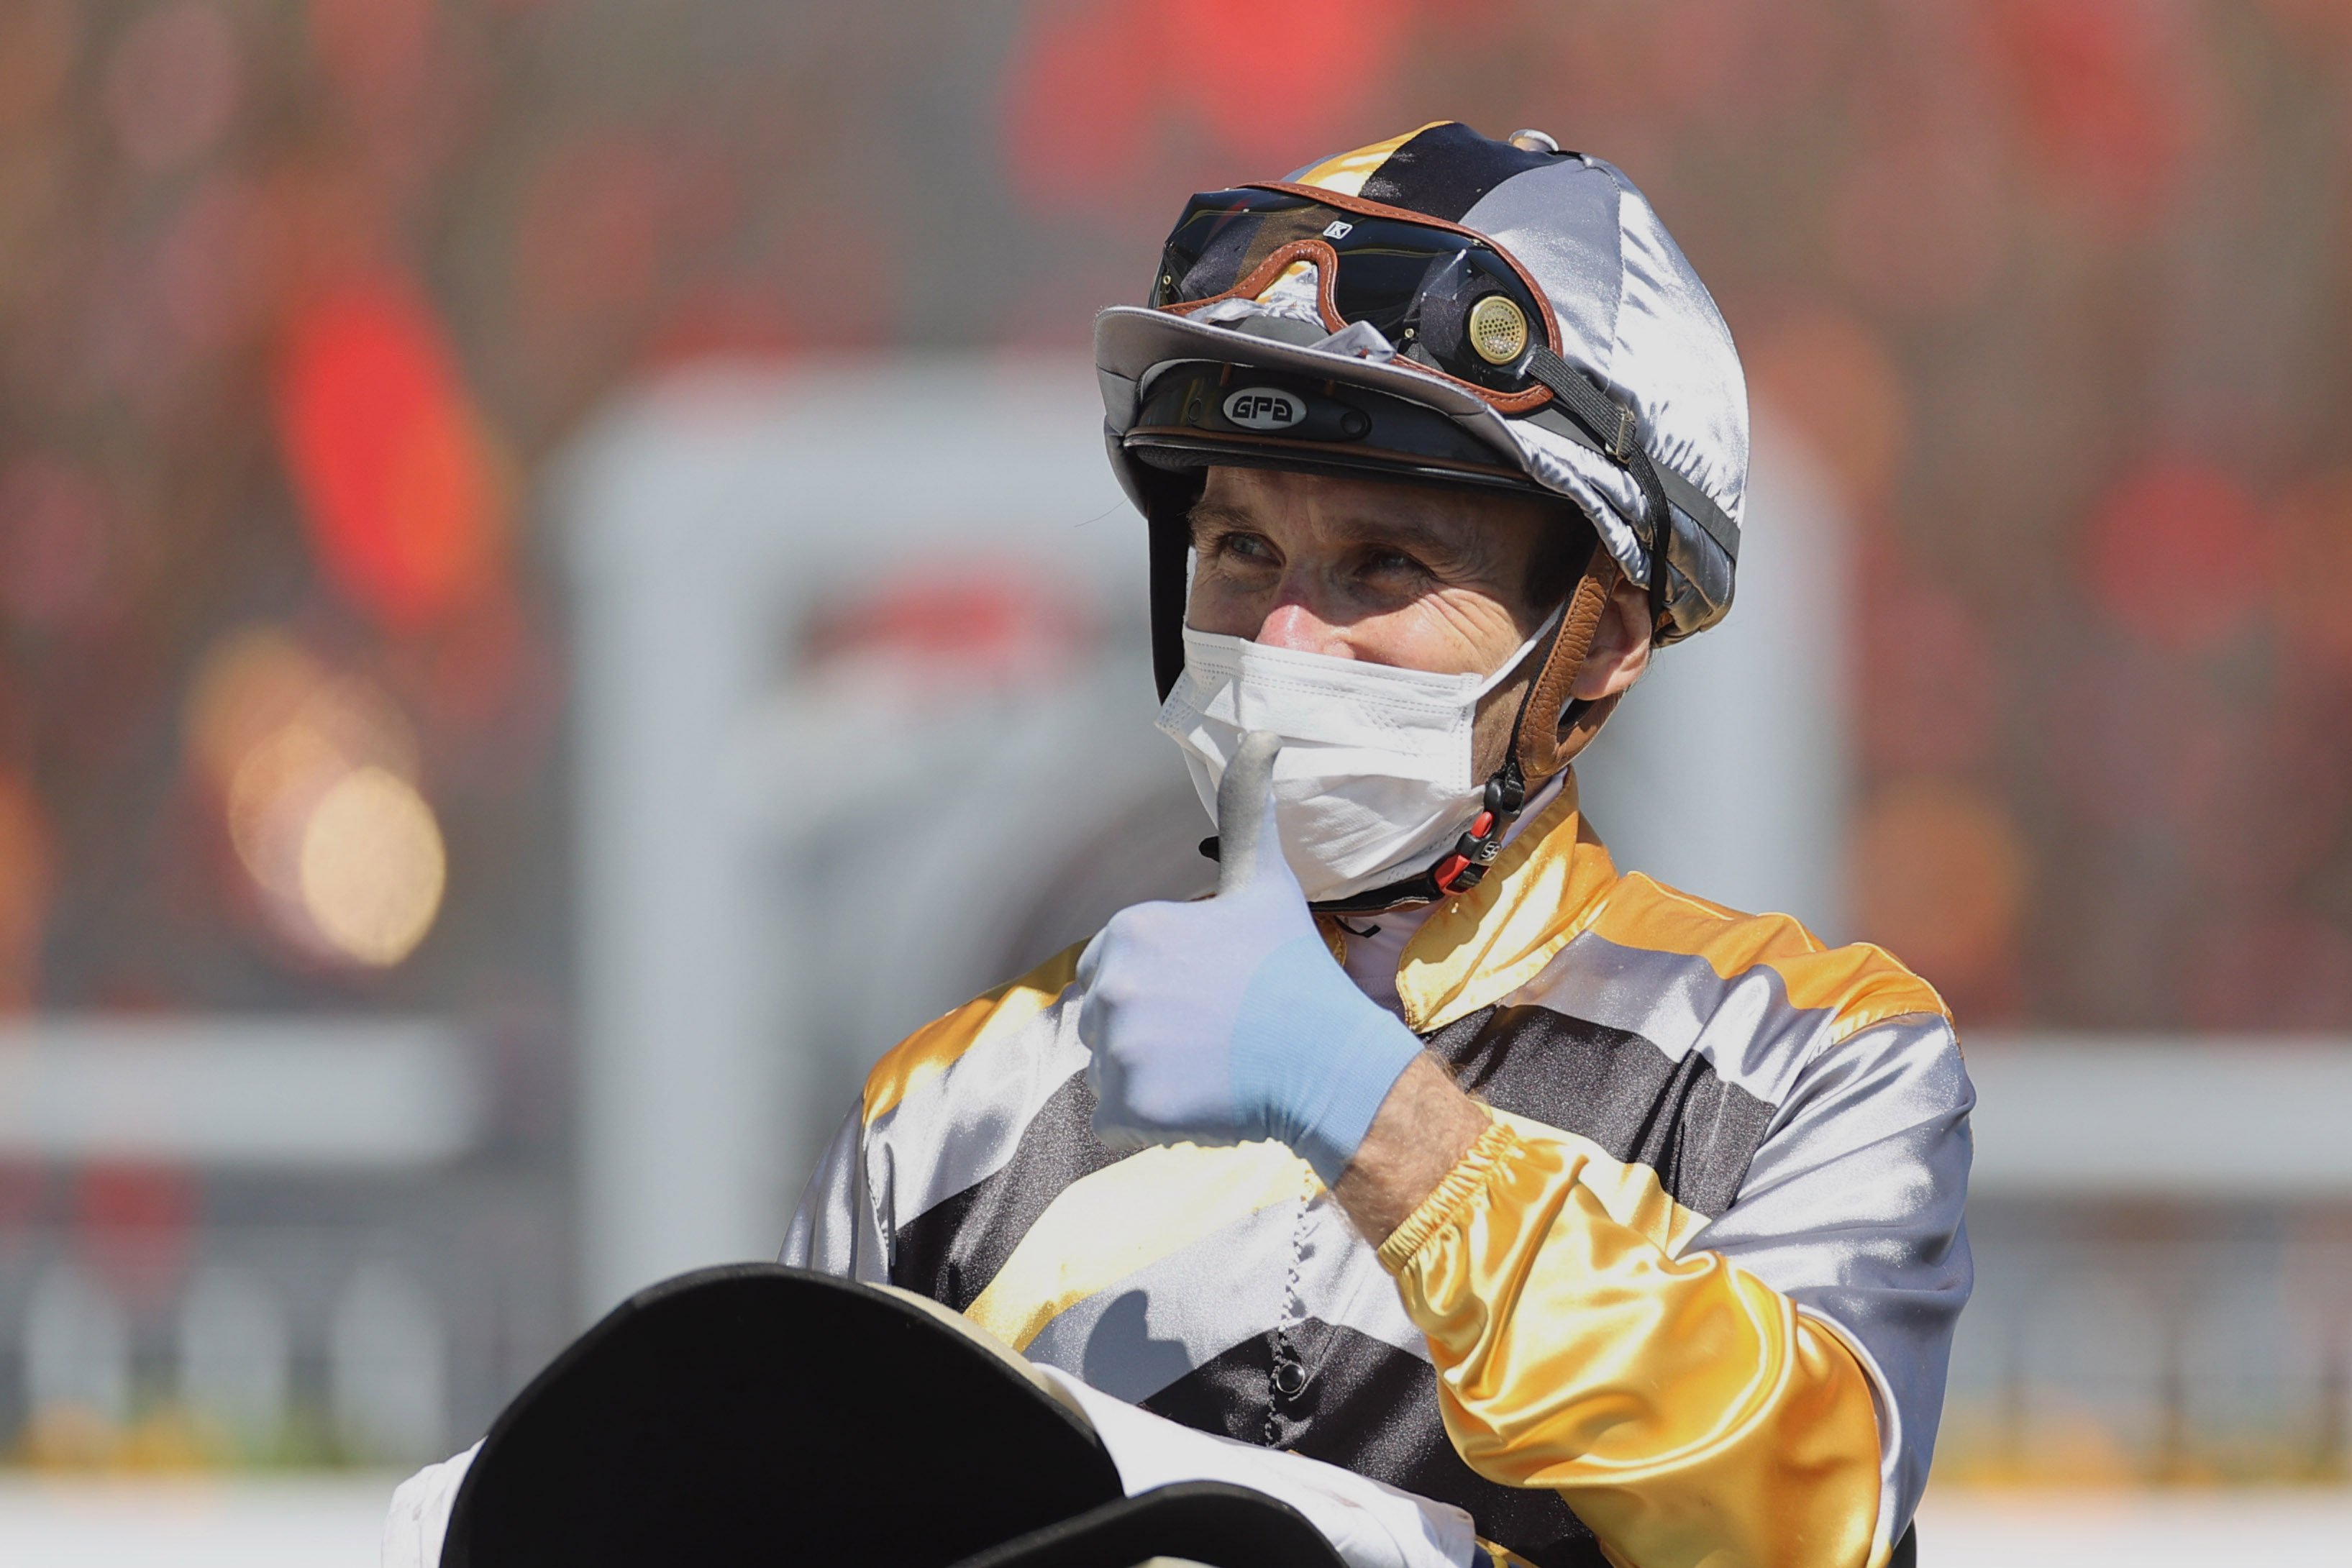 A jubilant Luke Currie after his maiden Hong Kong victory at Sha Tin on Sunday. Photos: HKJC